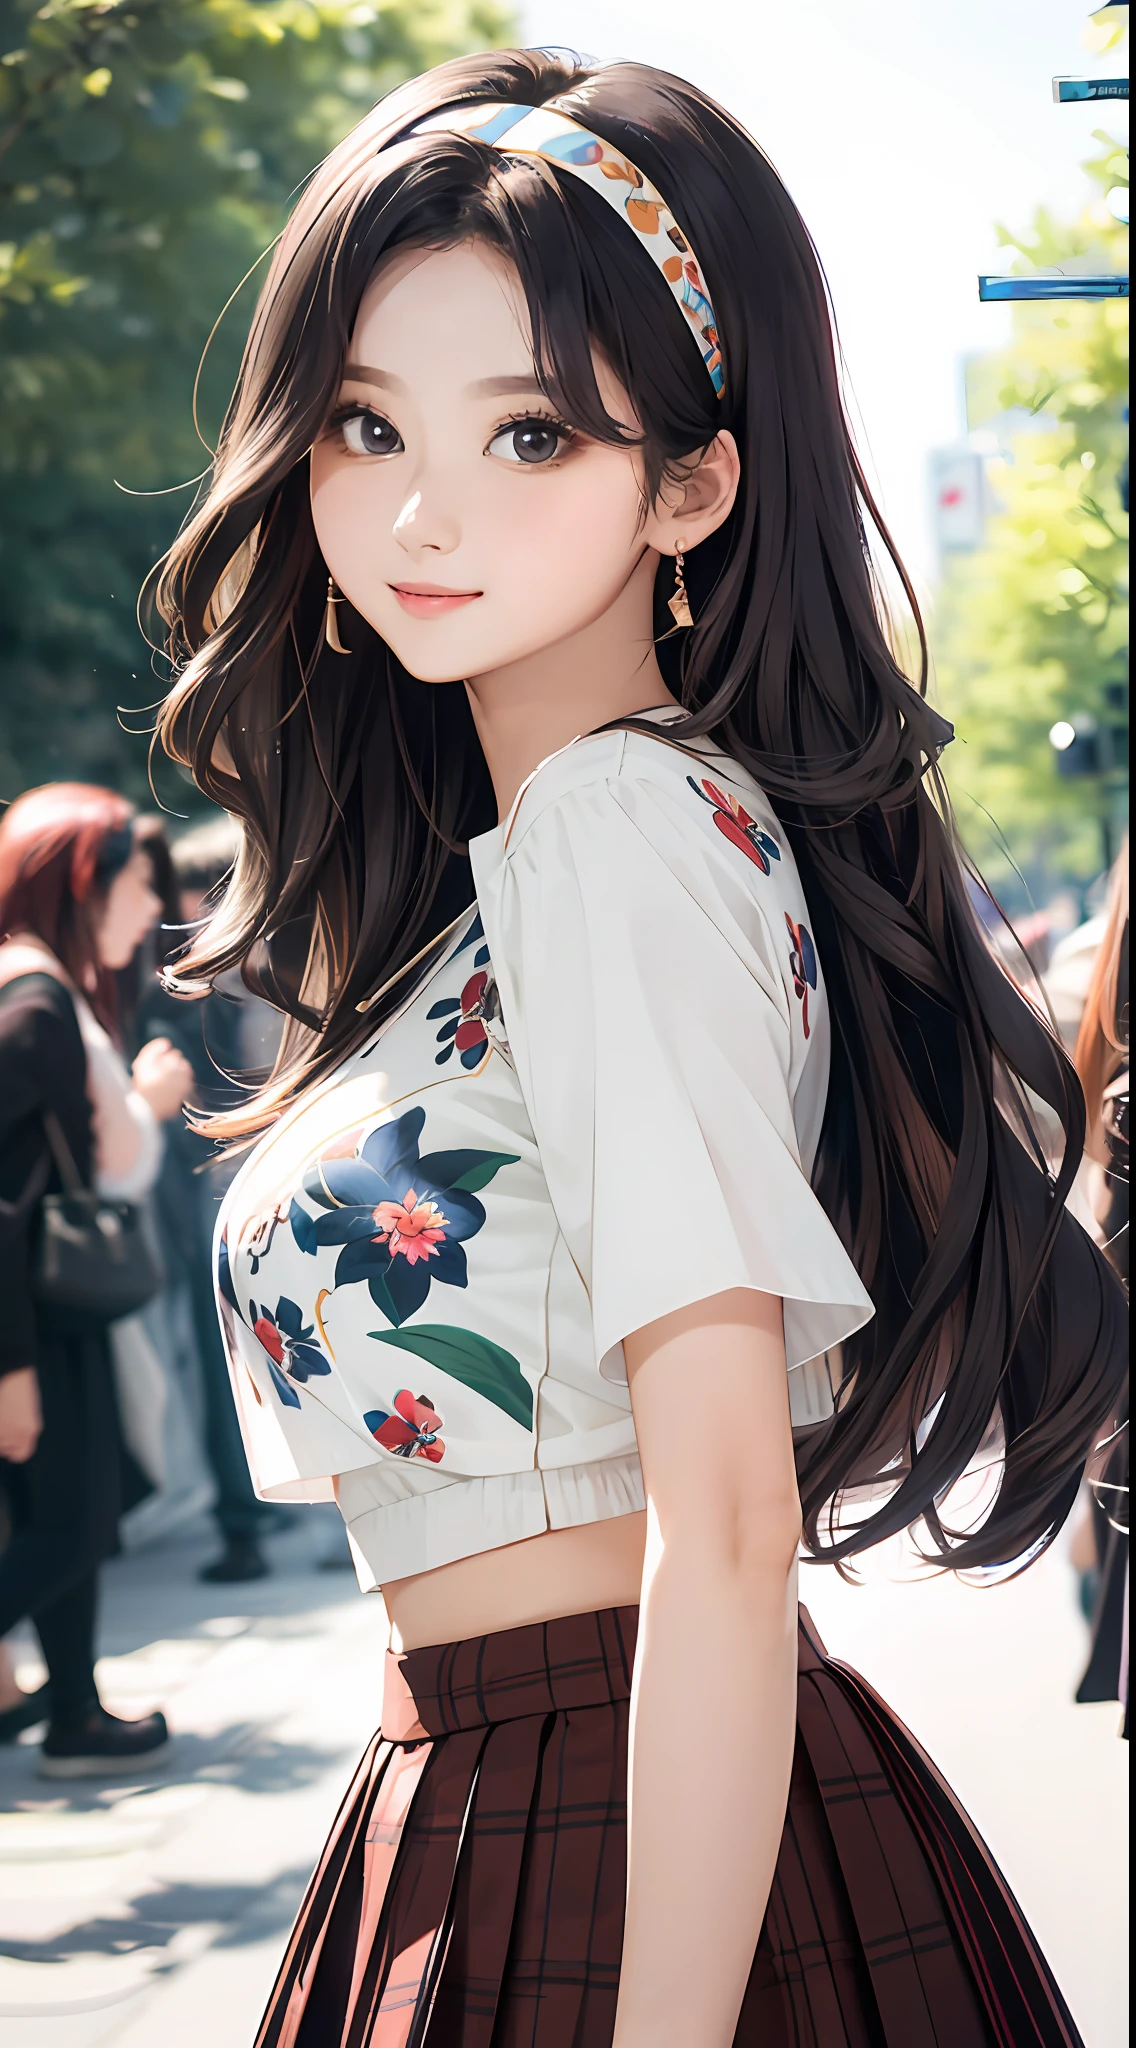 (masterpiece, best quality), beautiful woman, cute printed cropped shirt, pleated skirt, wavy hair, headband, asymmetrical bangs, perfect face, beautiful face, alluring, big gorgeous eyes, soft smile, perfect slim fit body, city streets, seoul, bright colors